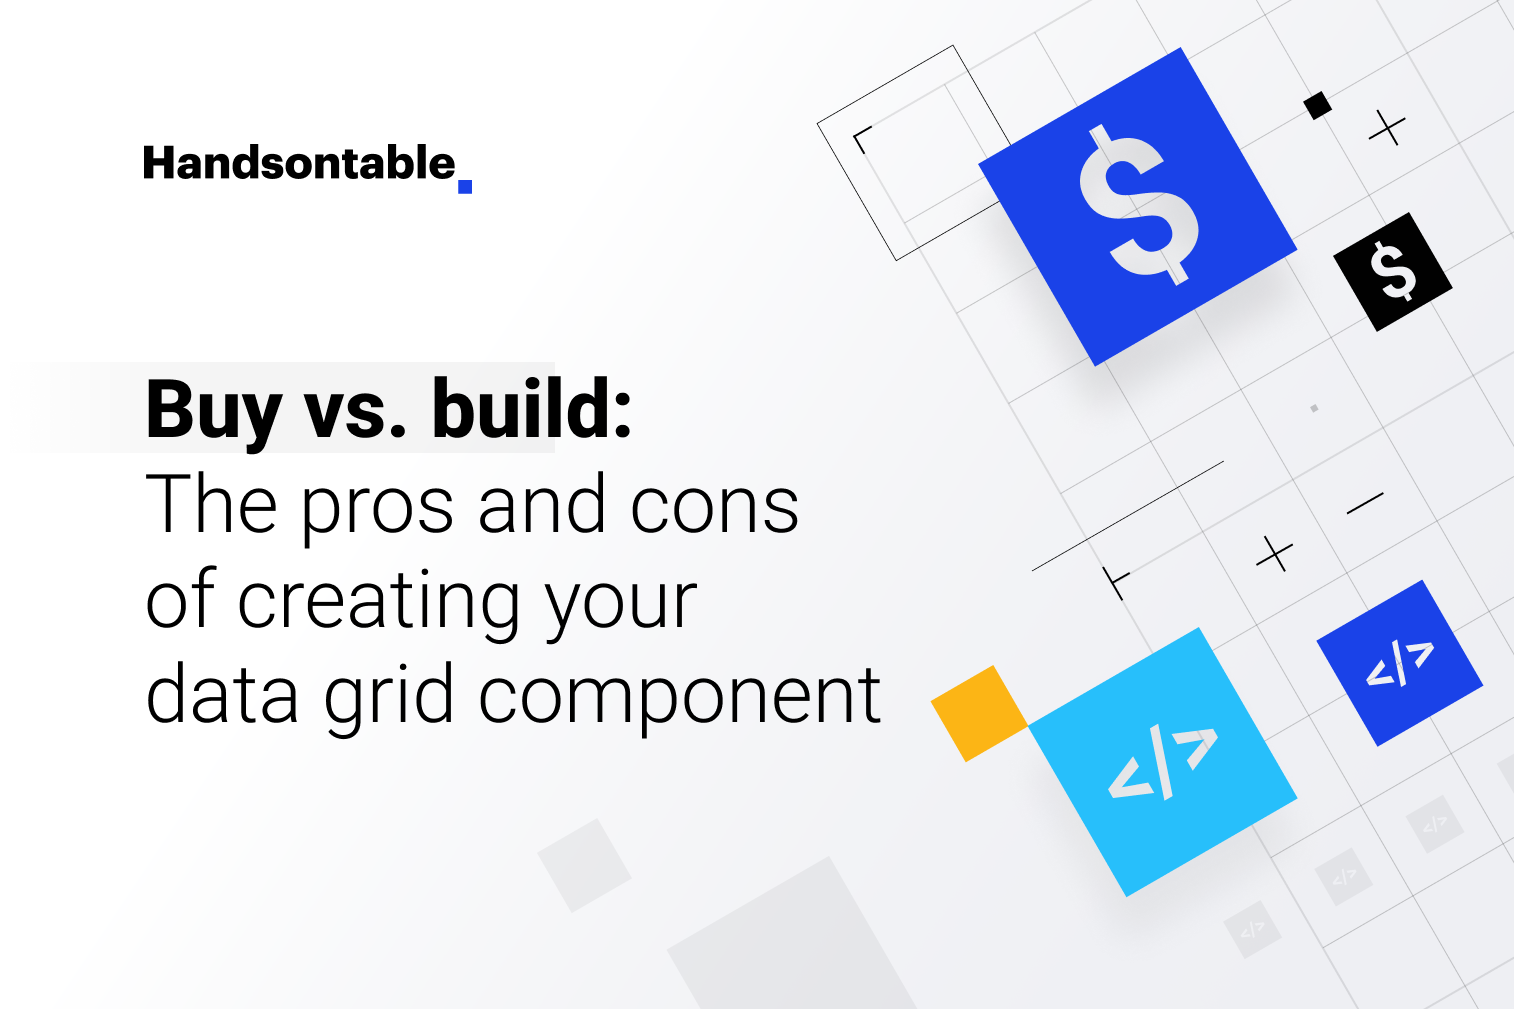 * Illustration for an article - Buy vs. build: The pros and cons of creating your data grid component